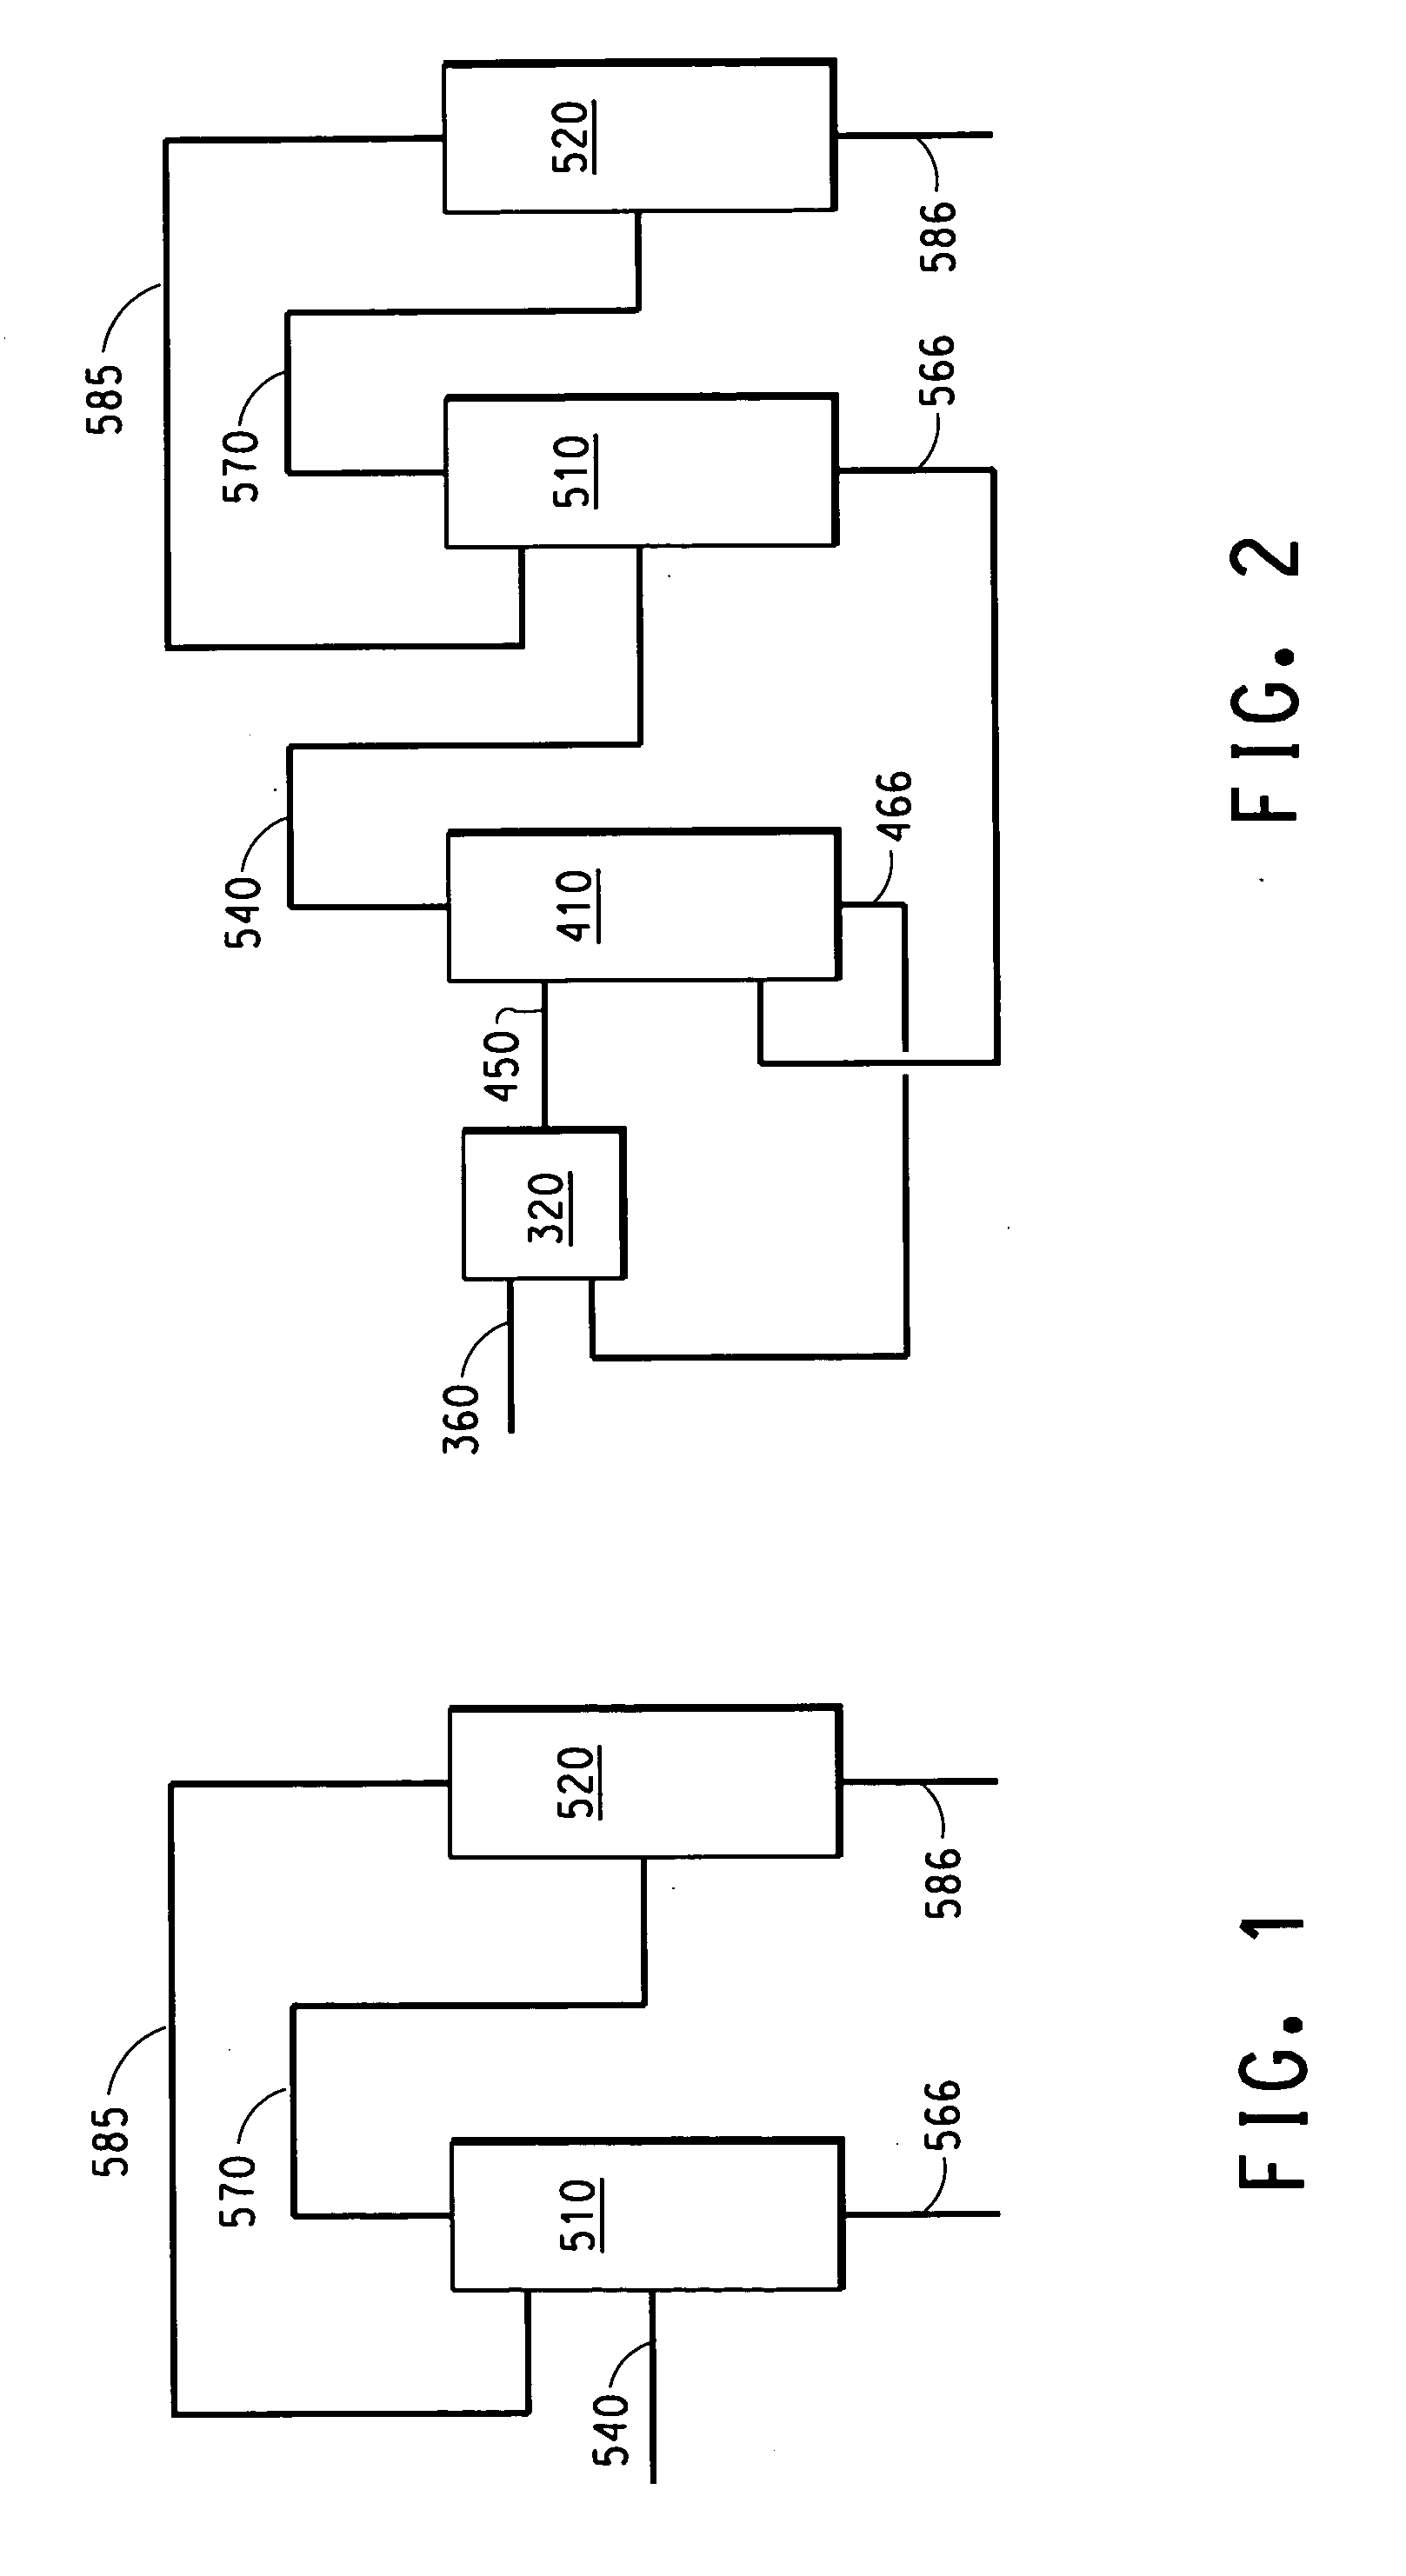 Azeotrope compositions comprising E-1,3,3,3-tetrafluoropropene and hydrogen fluoride and uses thereof